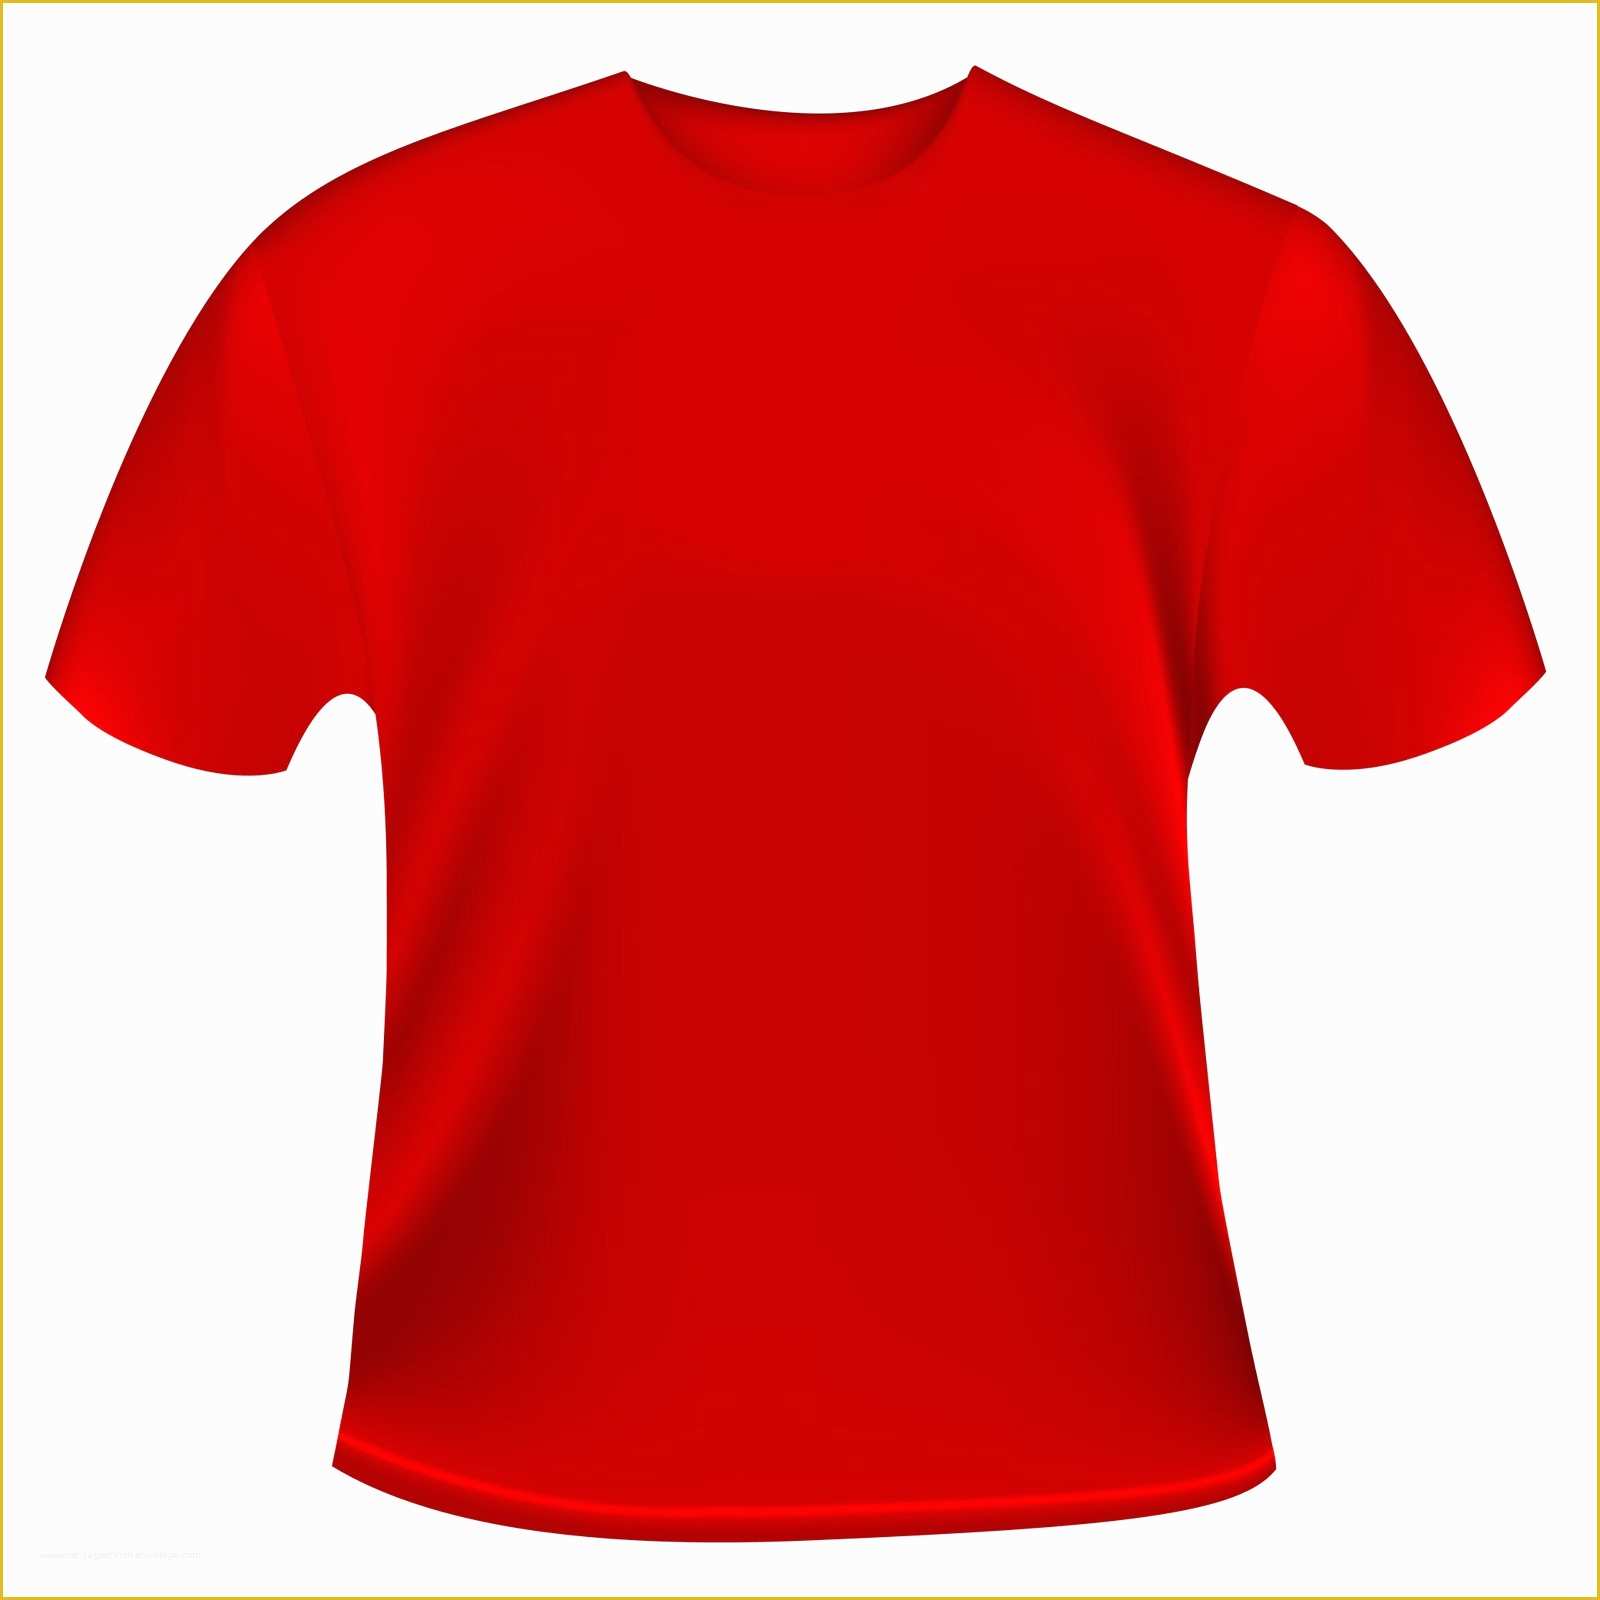 Blank Shirt Template Download Free